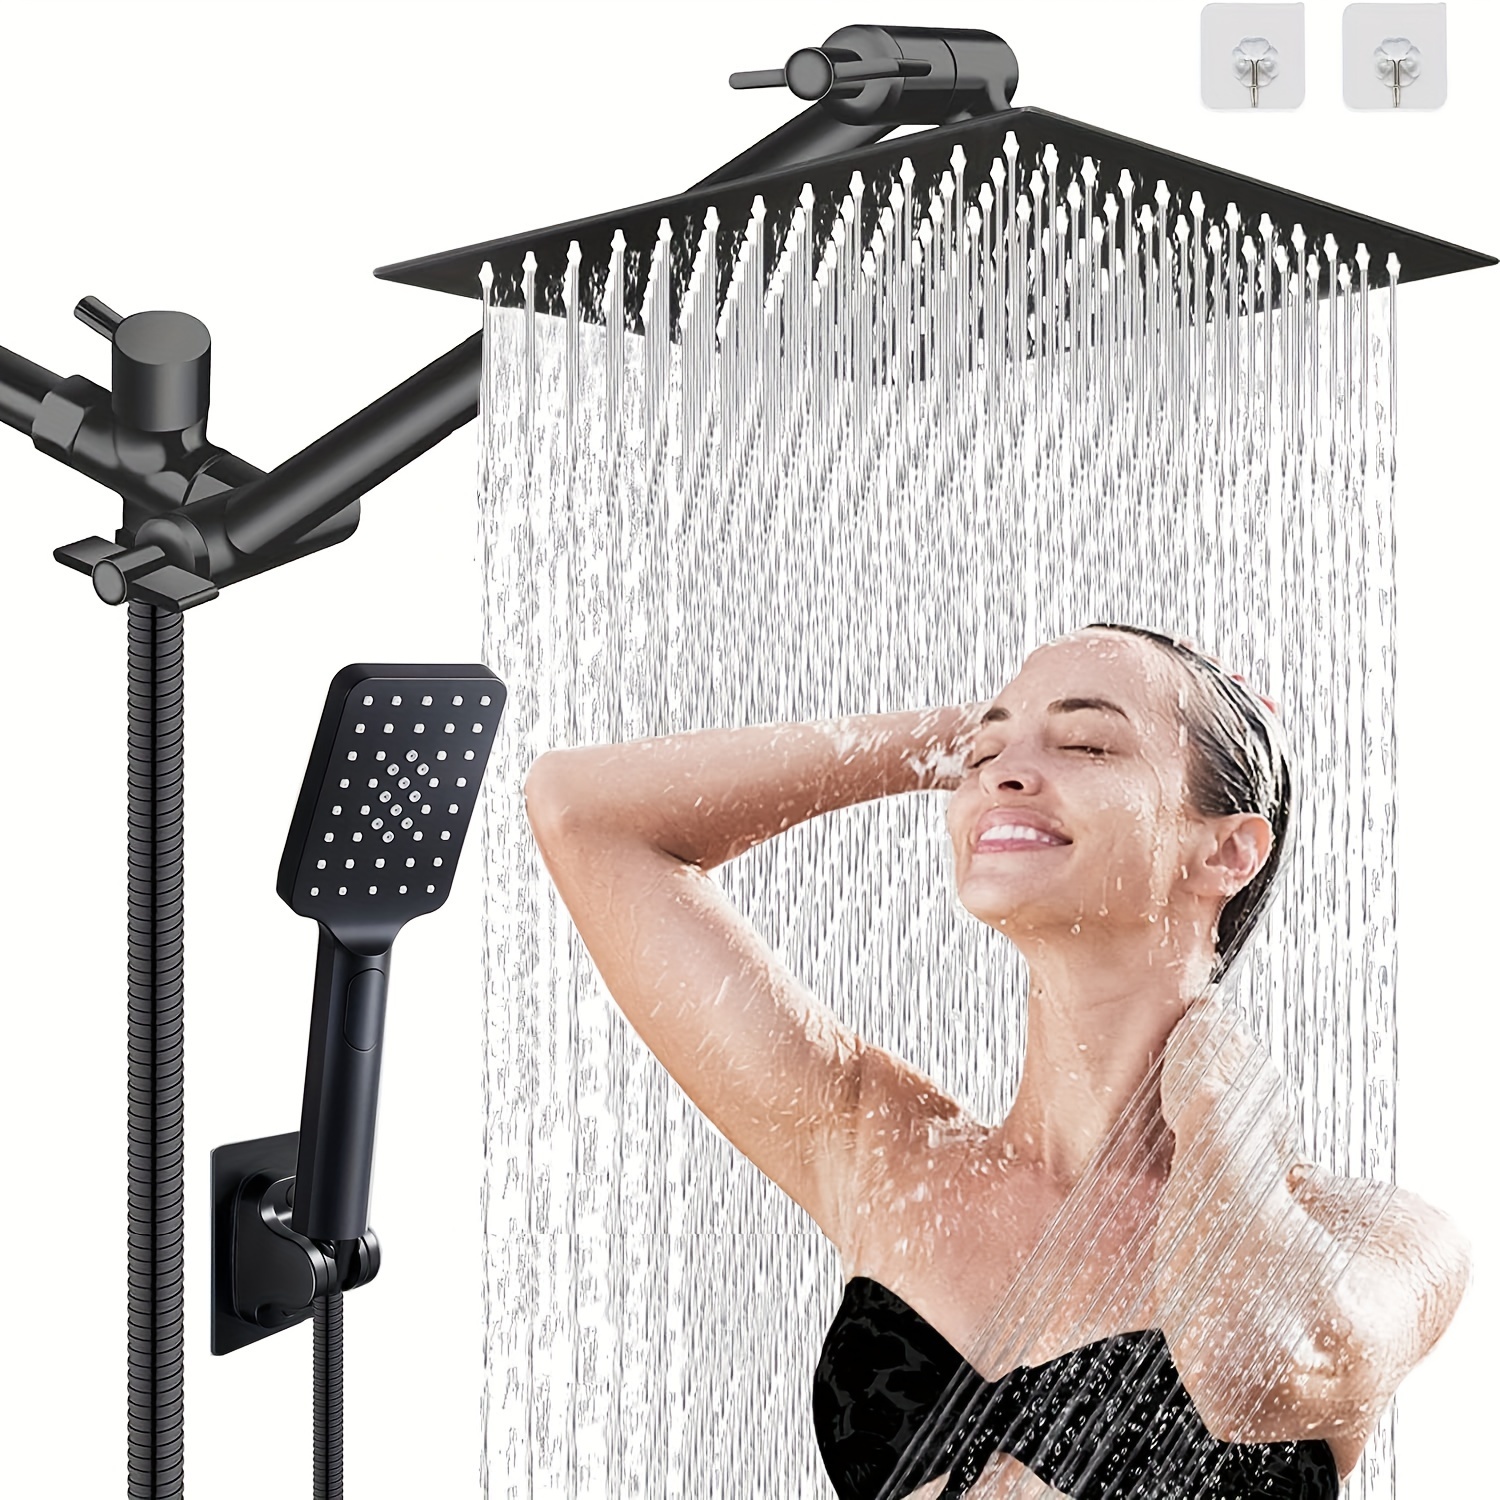 

Shower Head Combo, 10/12 Inch High Pressure Rain Shower Head With 9 Inch Adjustable Extension Arm And 3 Settings Handheld, Powerful Shower Spray Against Low Pressure Water With Long 78 Inch Hose